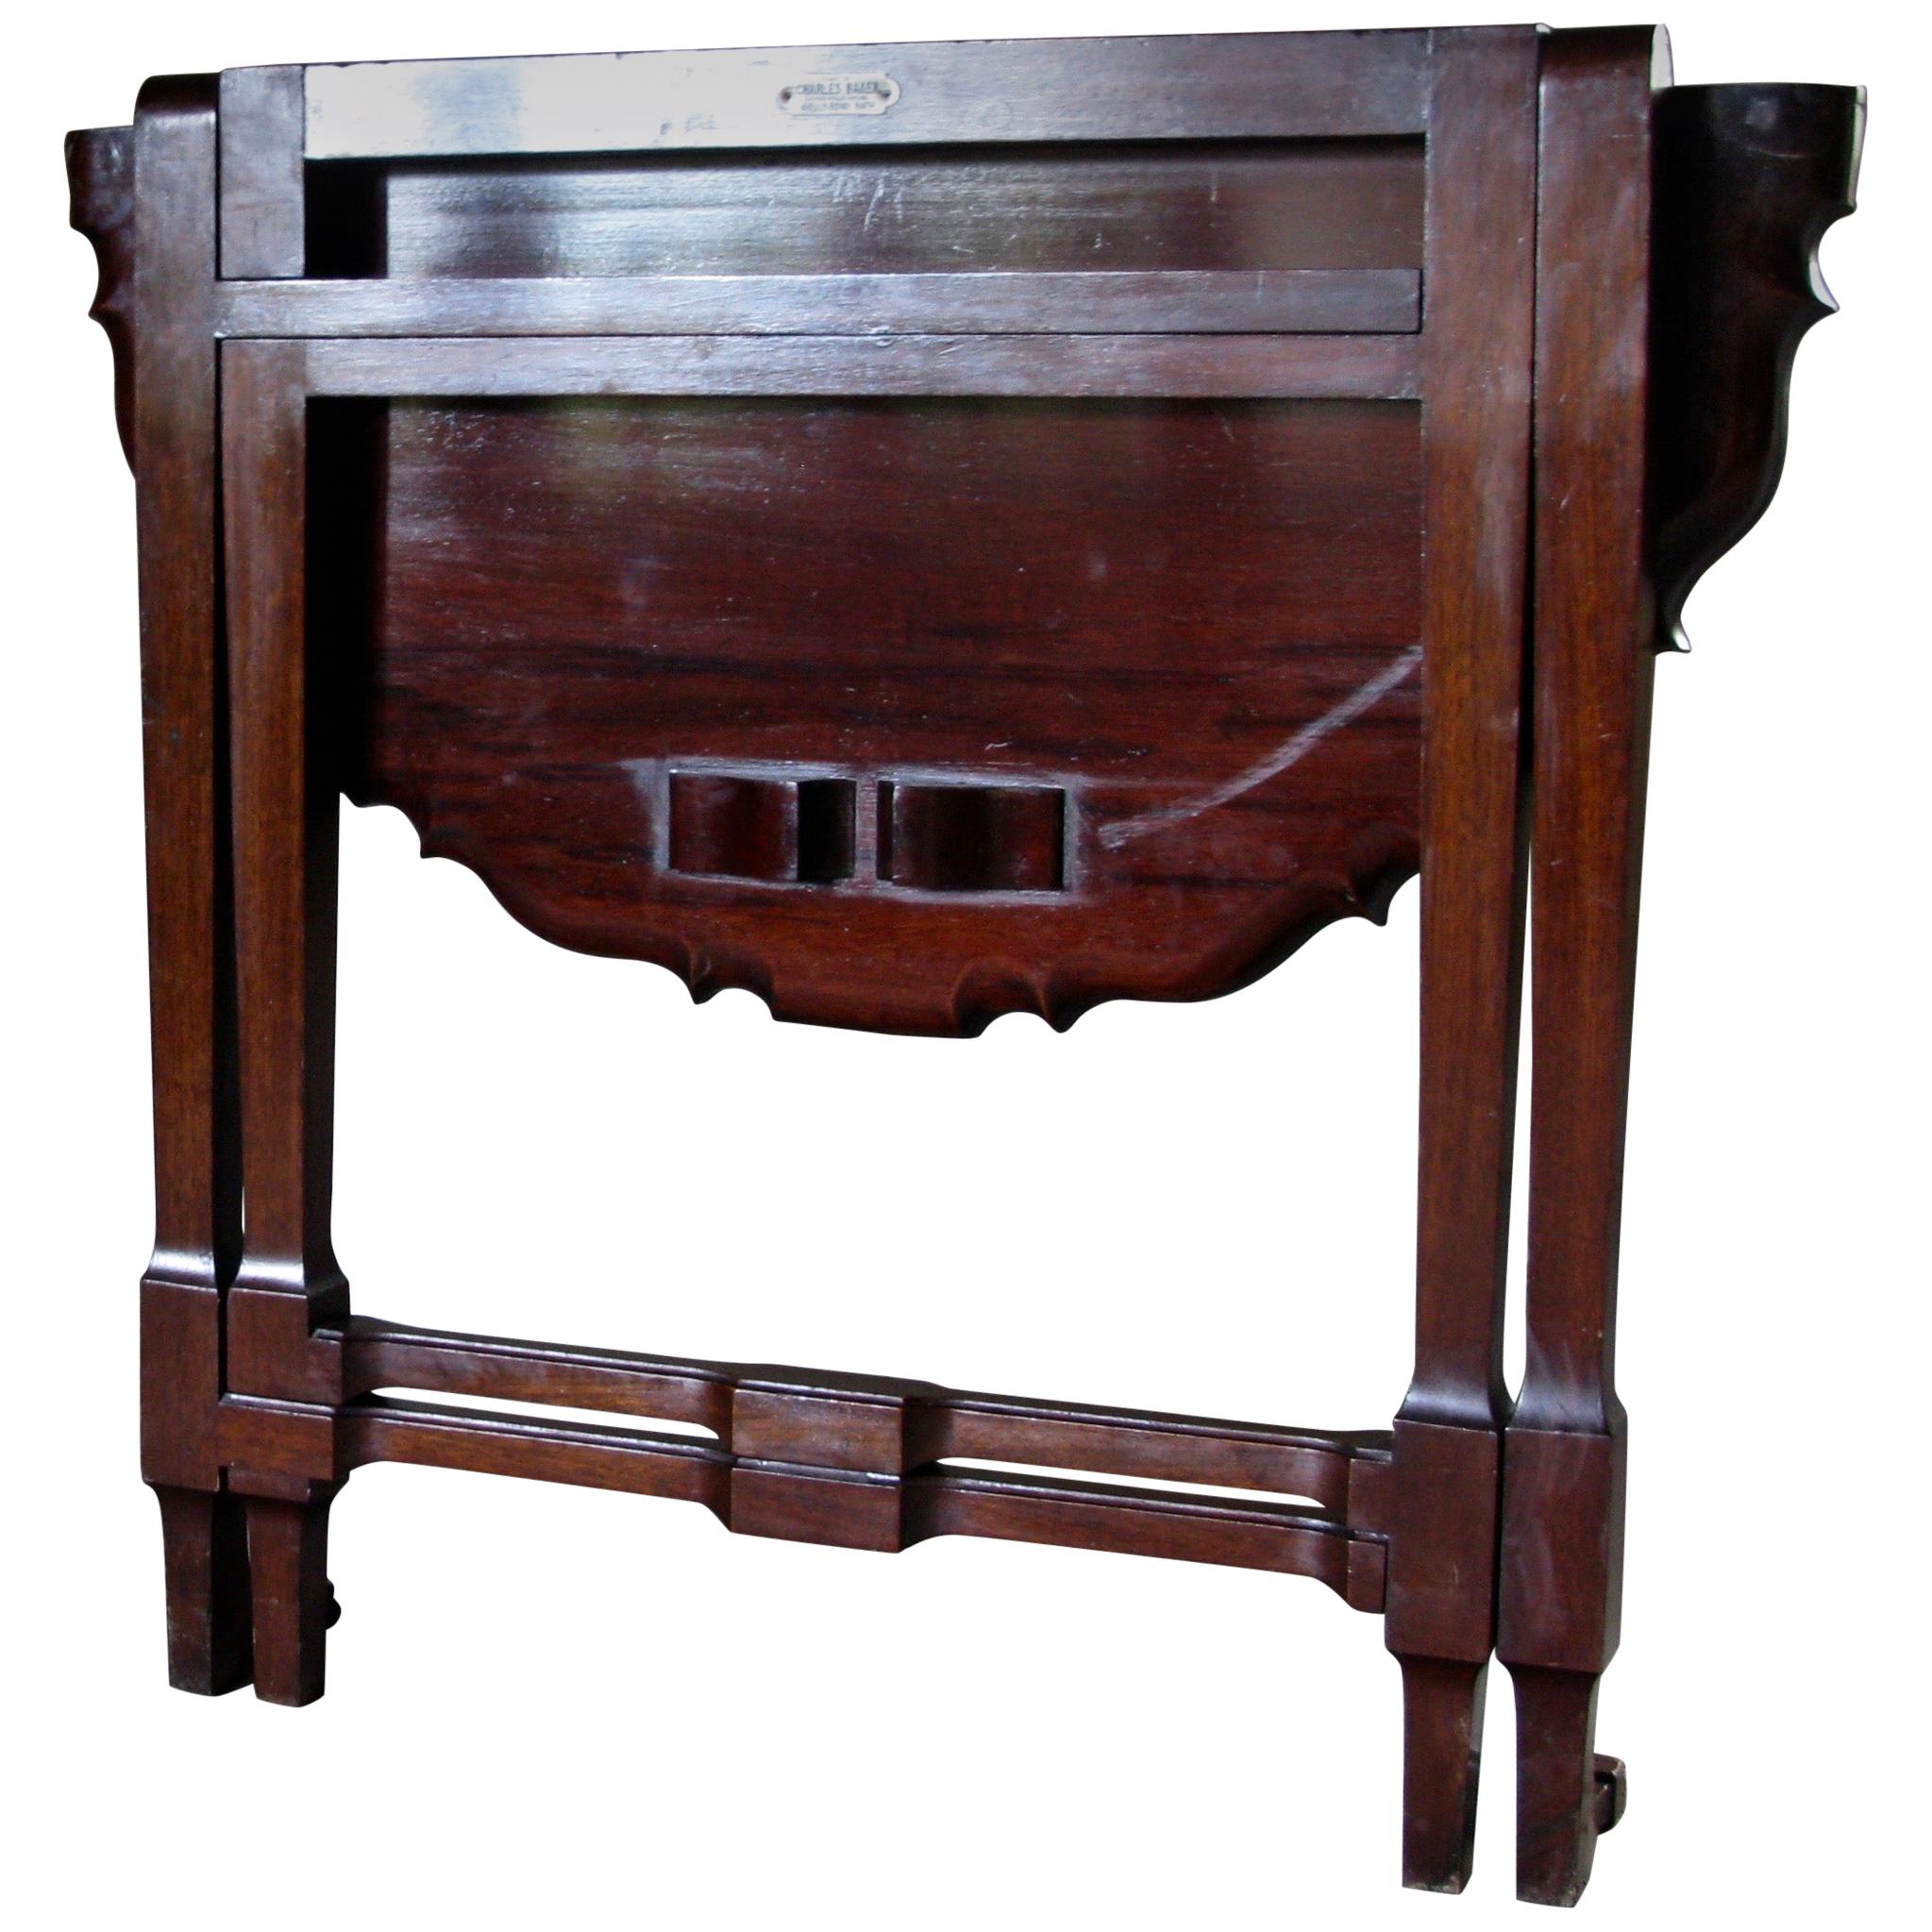 Beautiful signed, Charles baker, Bath, mahogany side table, drop-leaf table

A quality piece of Cuban mahogany

Charles Baker (1841-1932) h1 Charles Baker (1841-1932) was a Bath cabinetmaker and part of an important family of cabinet makers